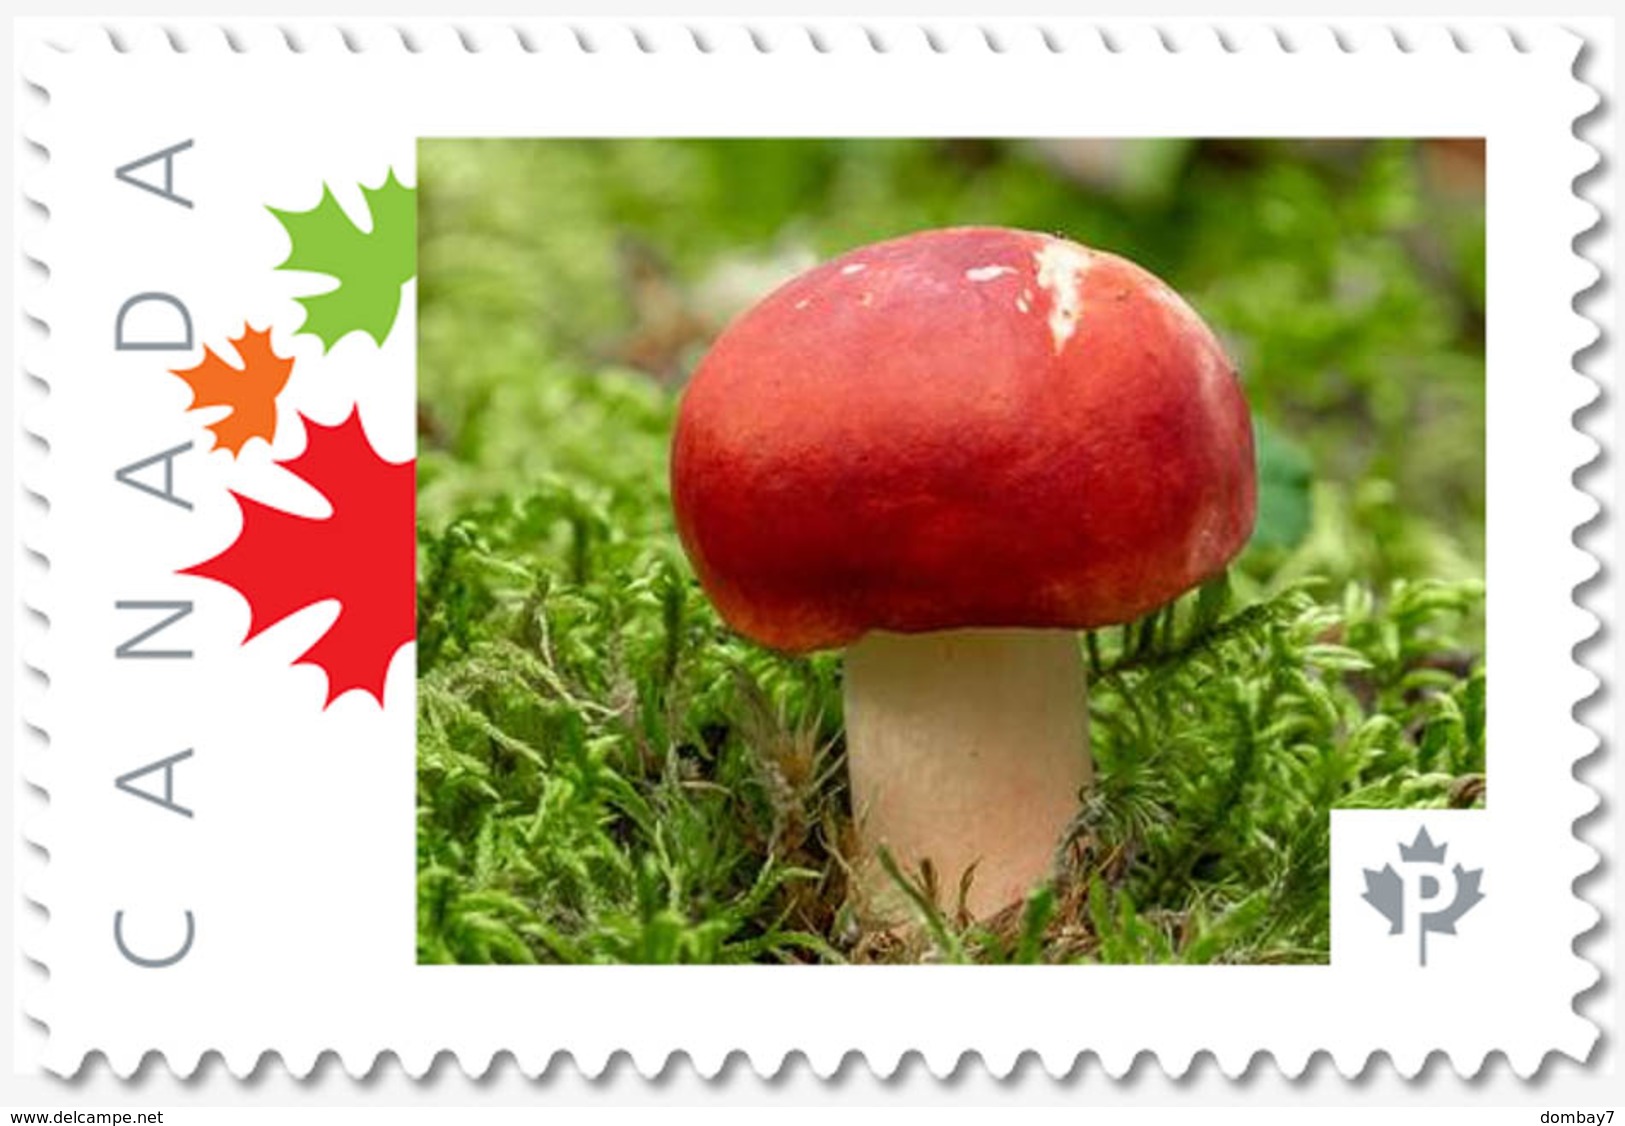 MUSHROOM = RED HAT = Picture Postage Stamp MNH-VF Canada 2019 [p19-02sn20] - Mushrooms